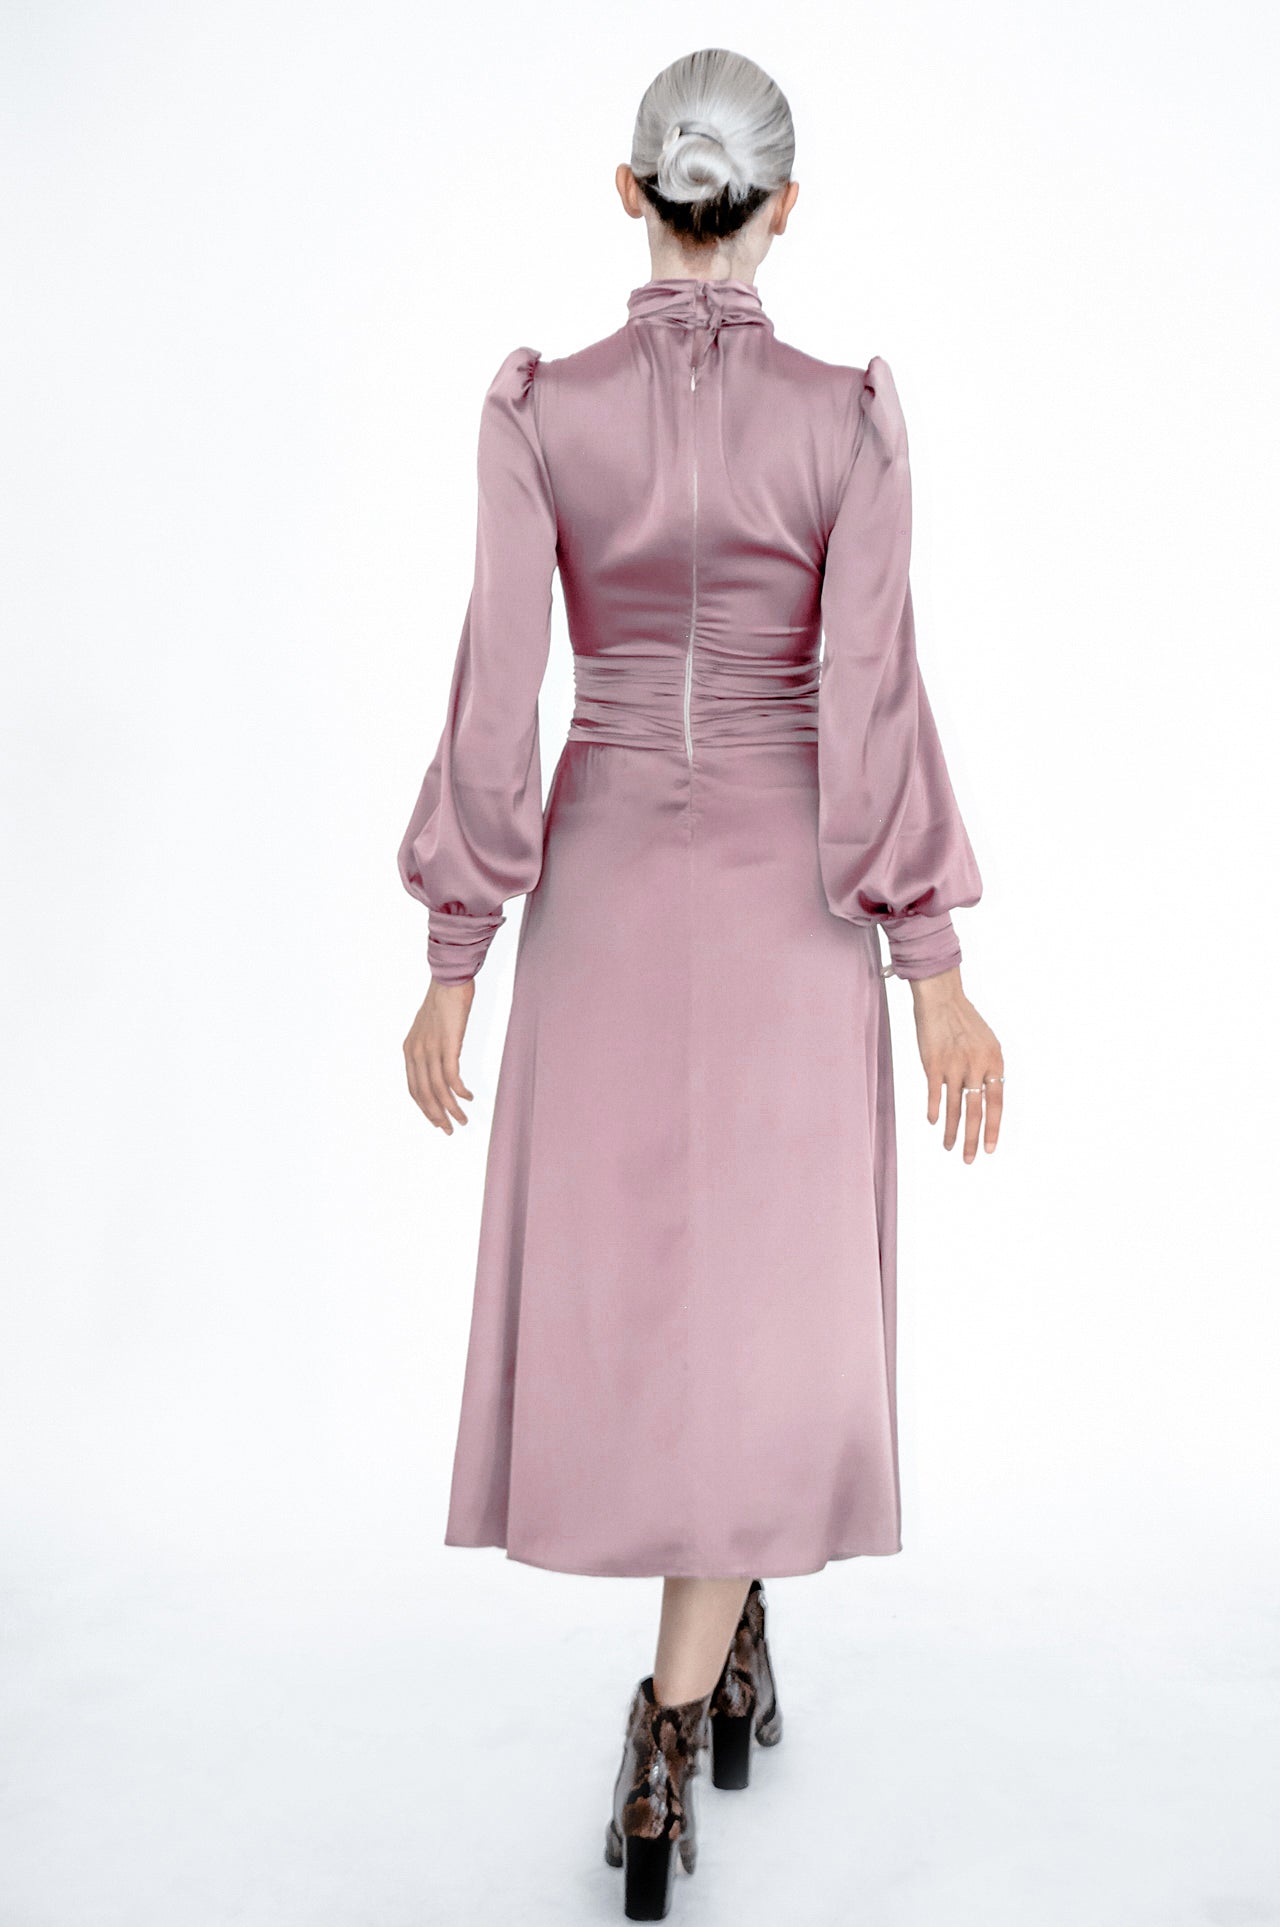 Turtleneck midi dress with bishop sleeves and ruched details